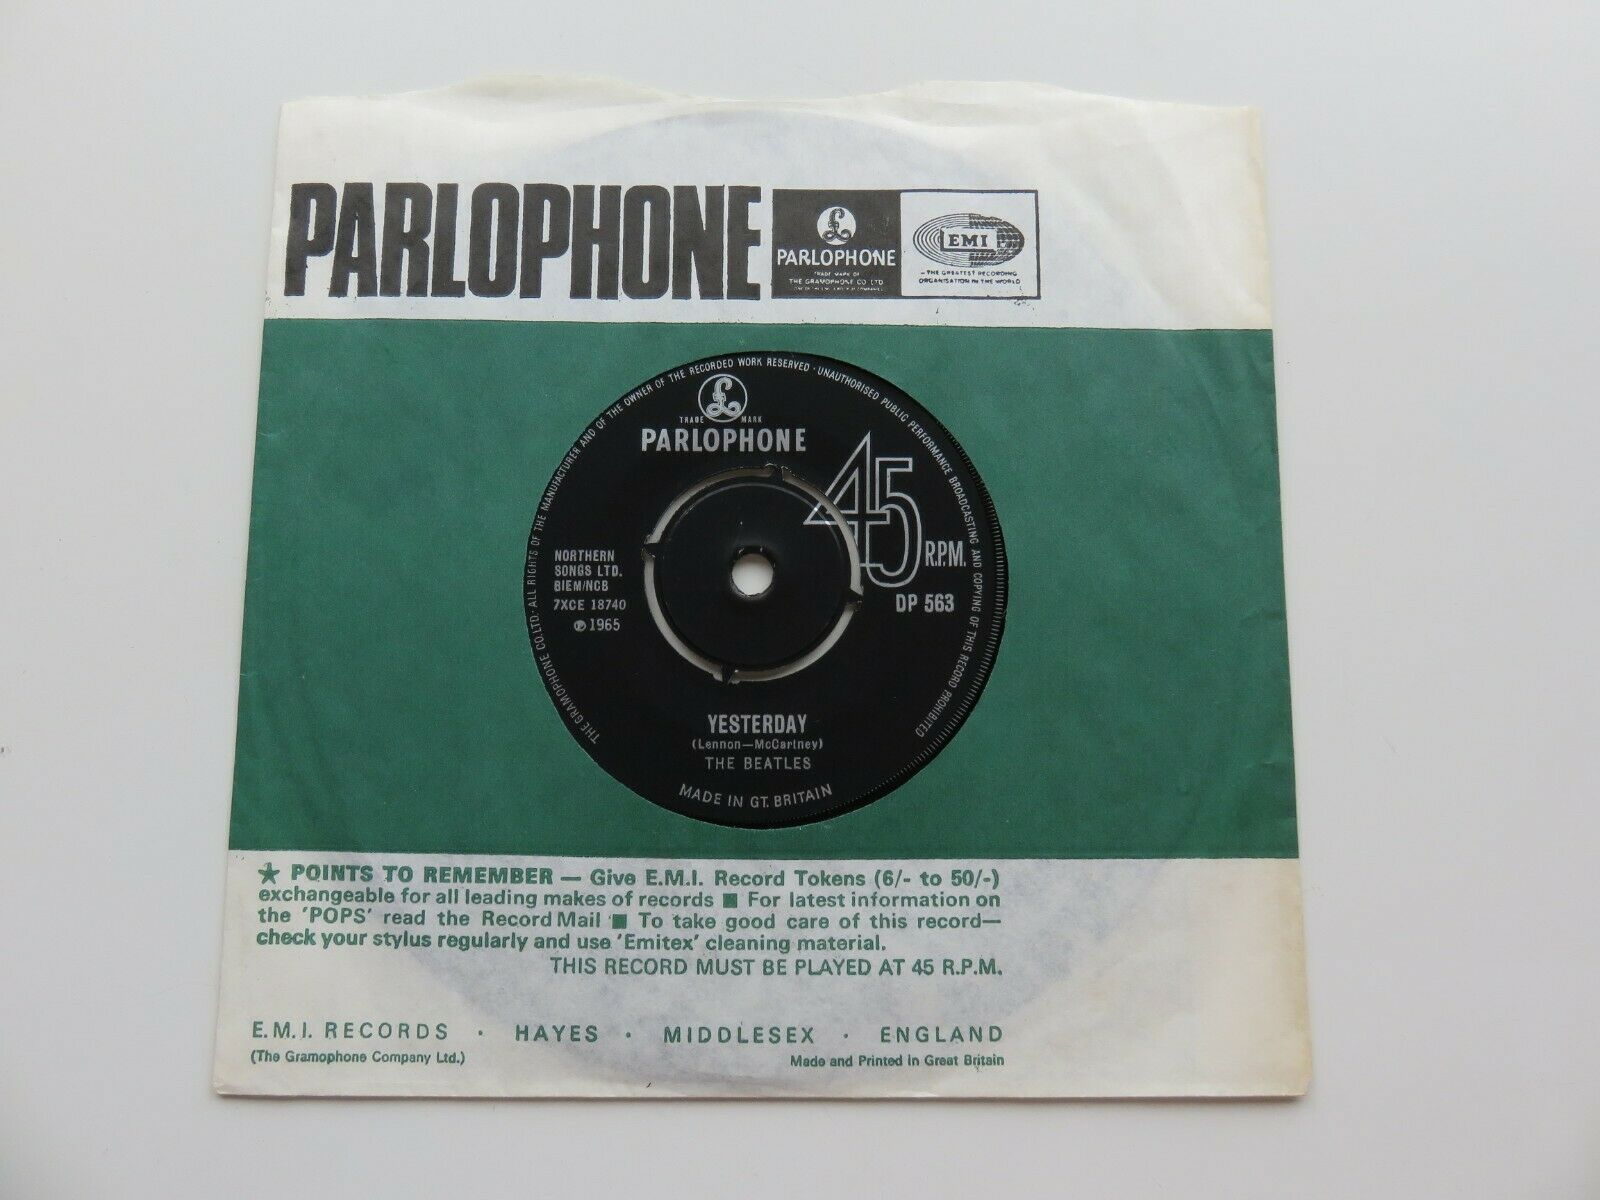 Pic 1 THE BEATLES 1965 EXPORT 45  YESTERDAY  DIZZY MISS LIZZY   PARLOPHONE  DP 563 EX+